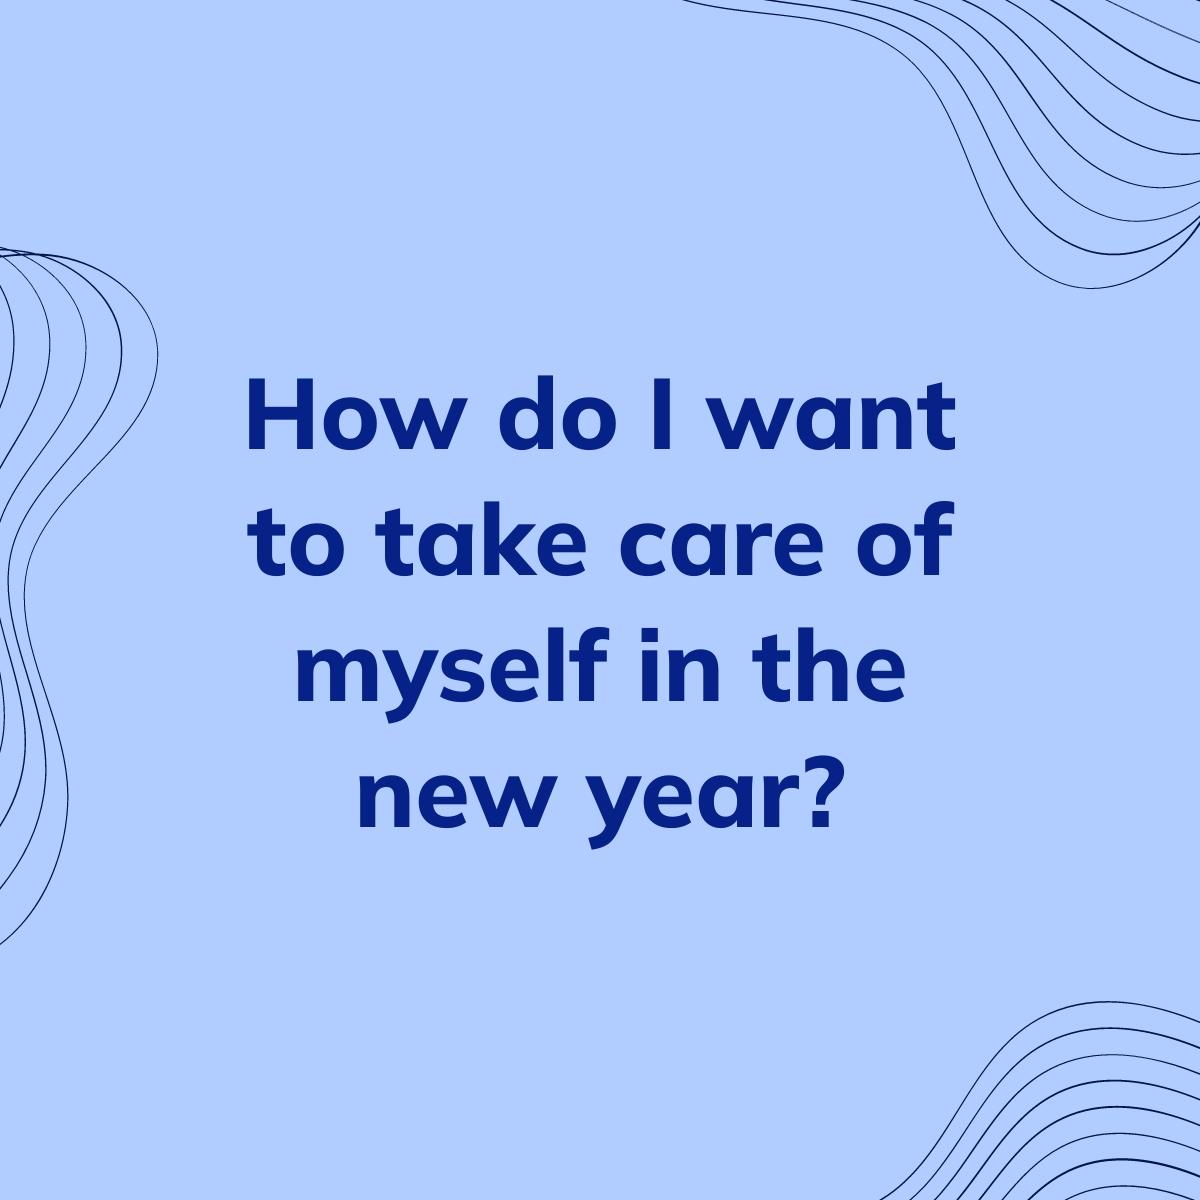 Journal Prompt: How do I want to take care of myself in the new year?